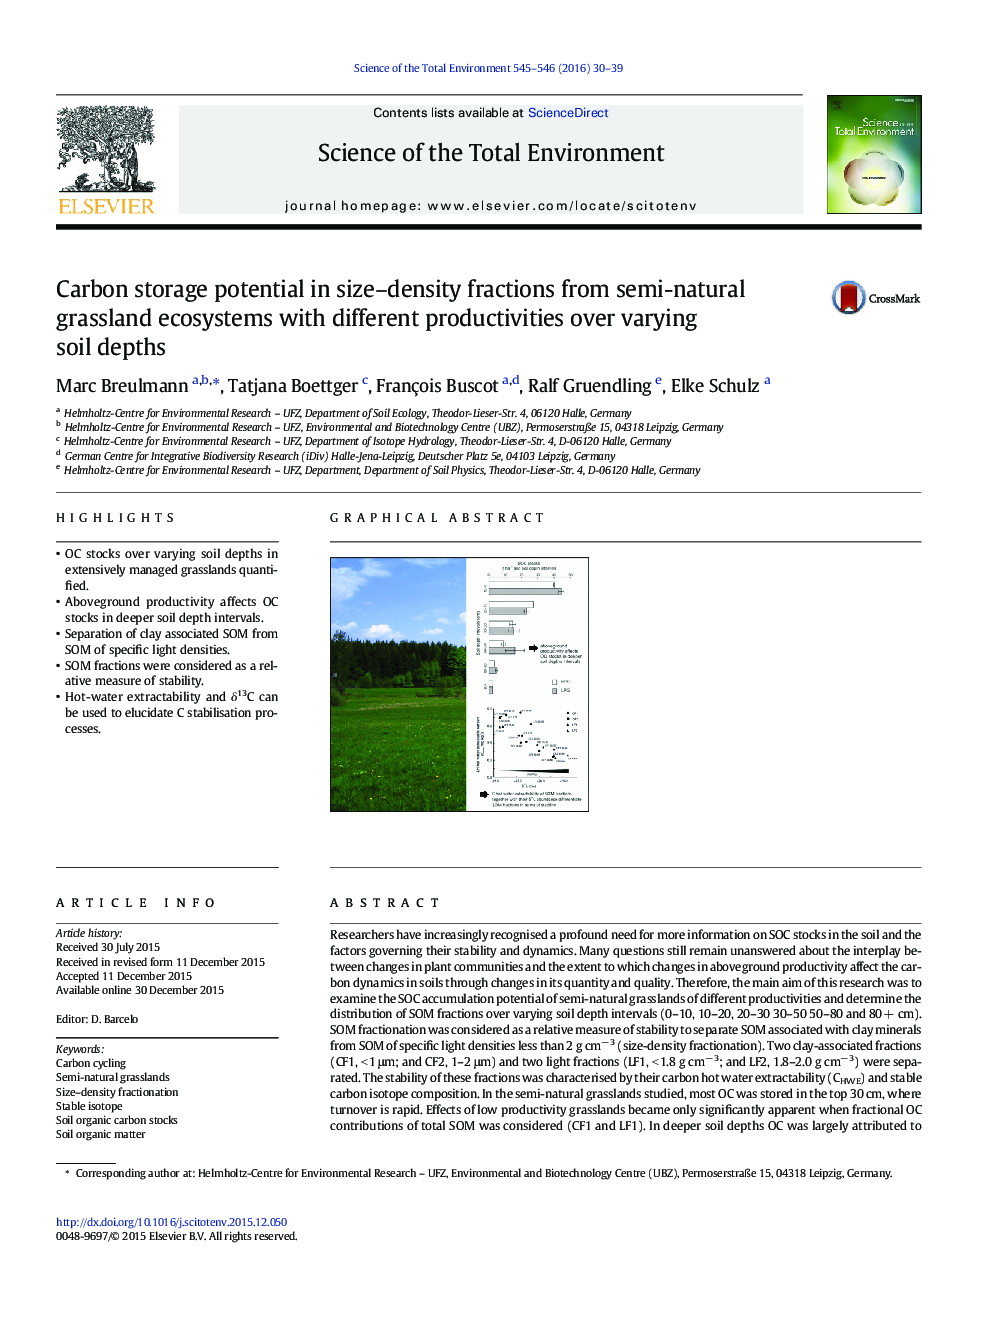 Carbon storage potential in size-density fractions from semi-natural grassland ecosystems with different productivities over varying soil depths